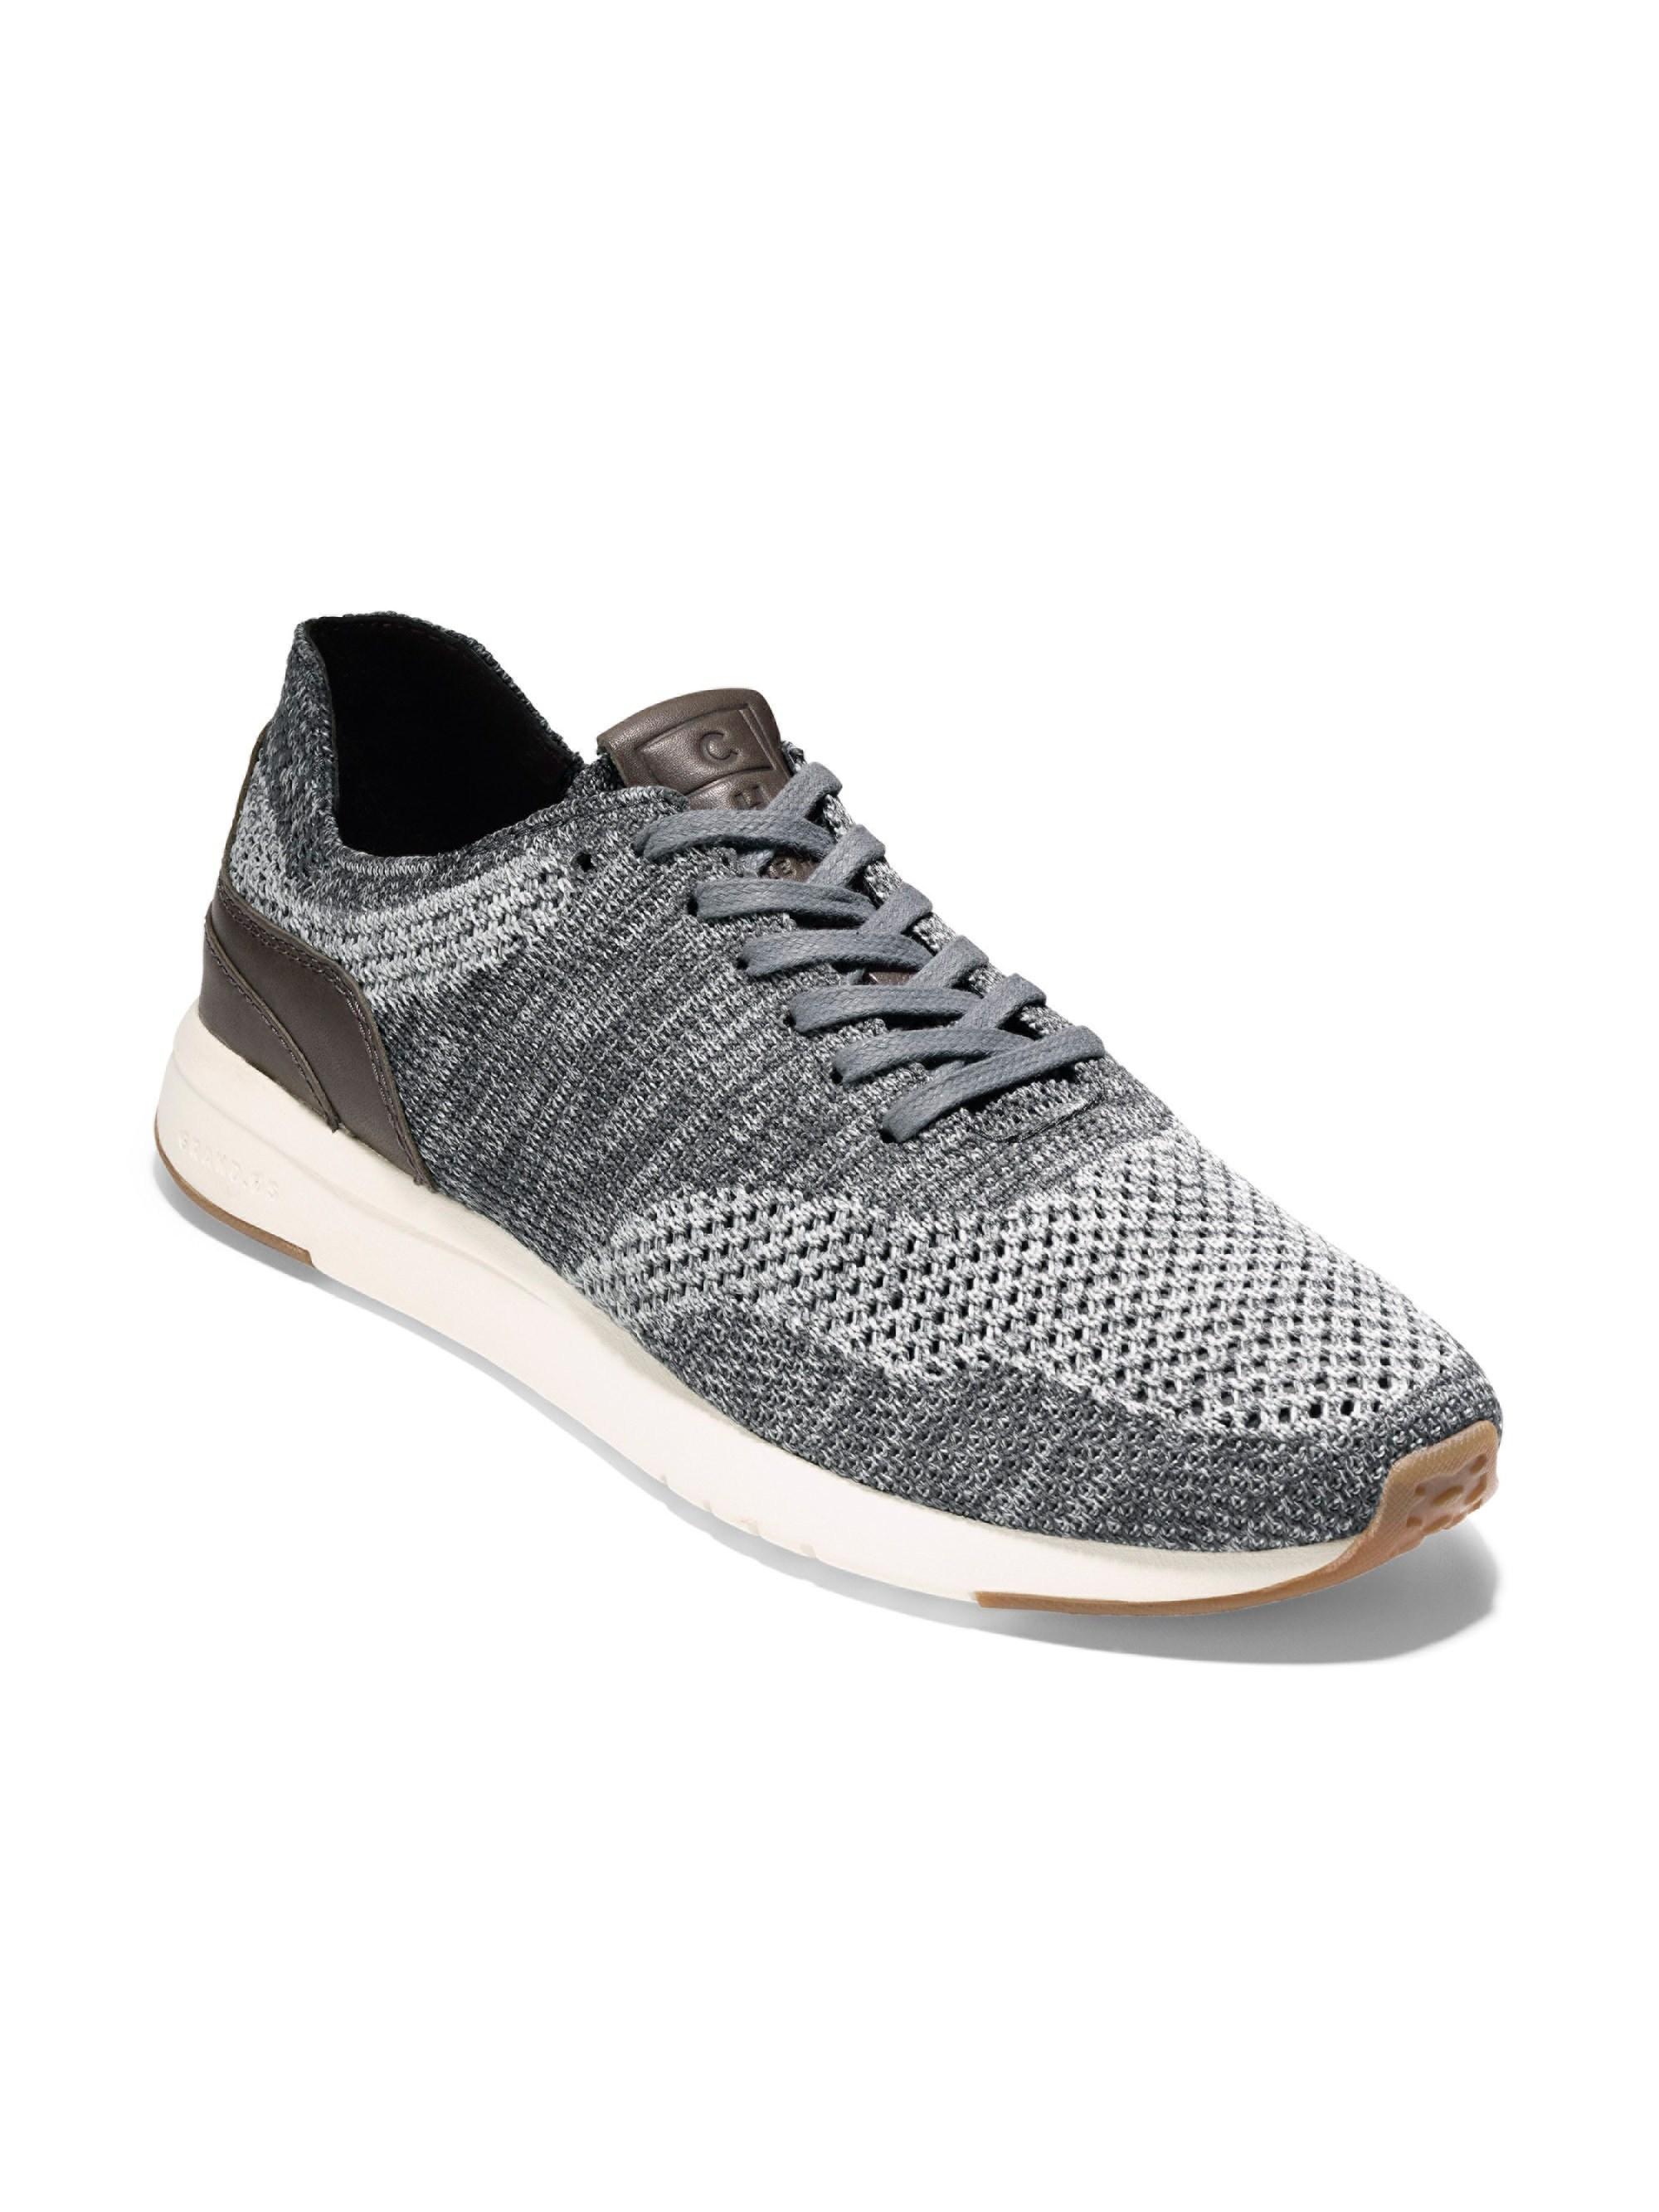 Cole Haan Rubber Grandpro Runner Stitchlite Sneaker in Gray for Men - Lyst